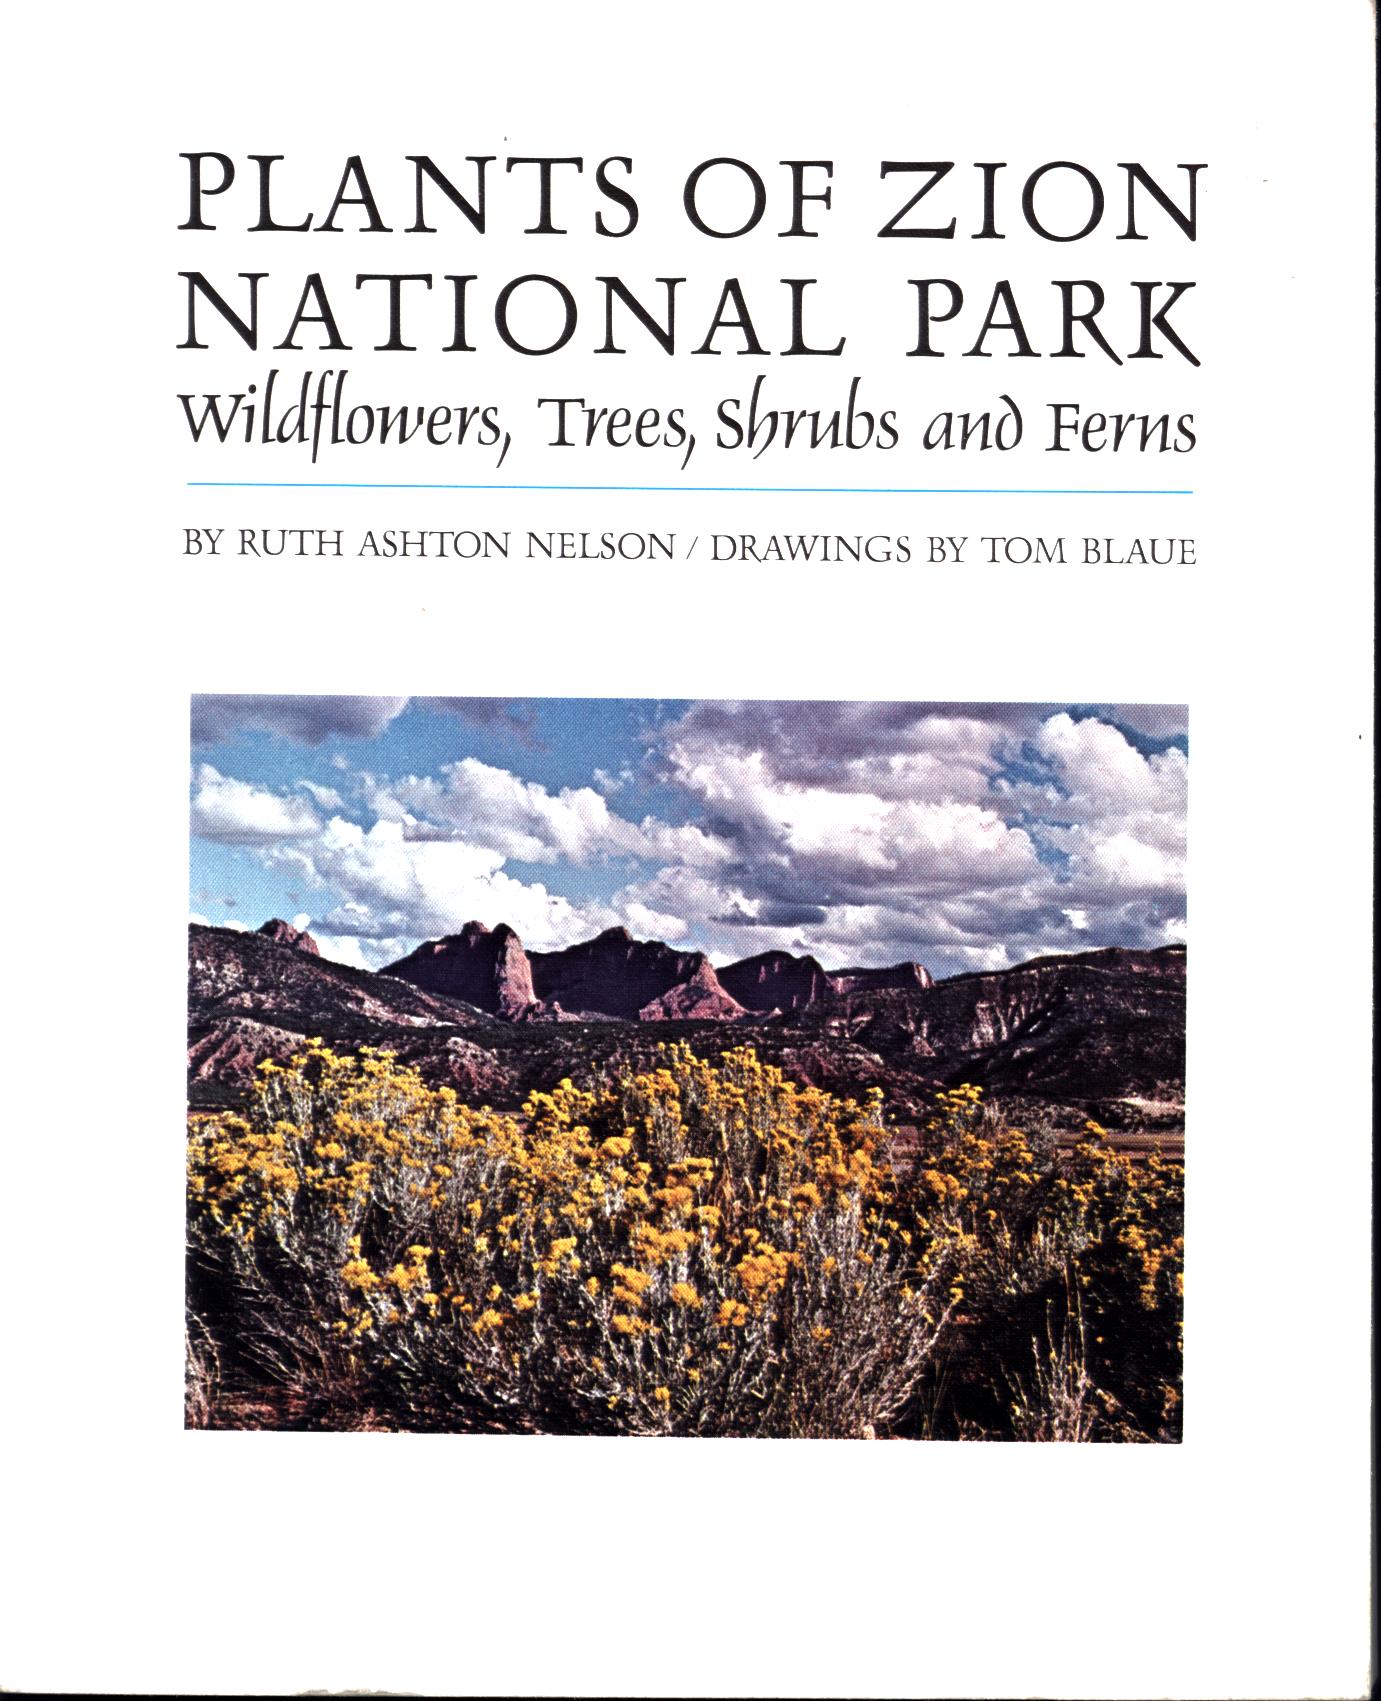 PLANTS OF ZION NATIONAL PARK: wildflowers, trees, shrubs, and ferns.